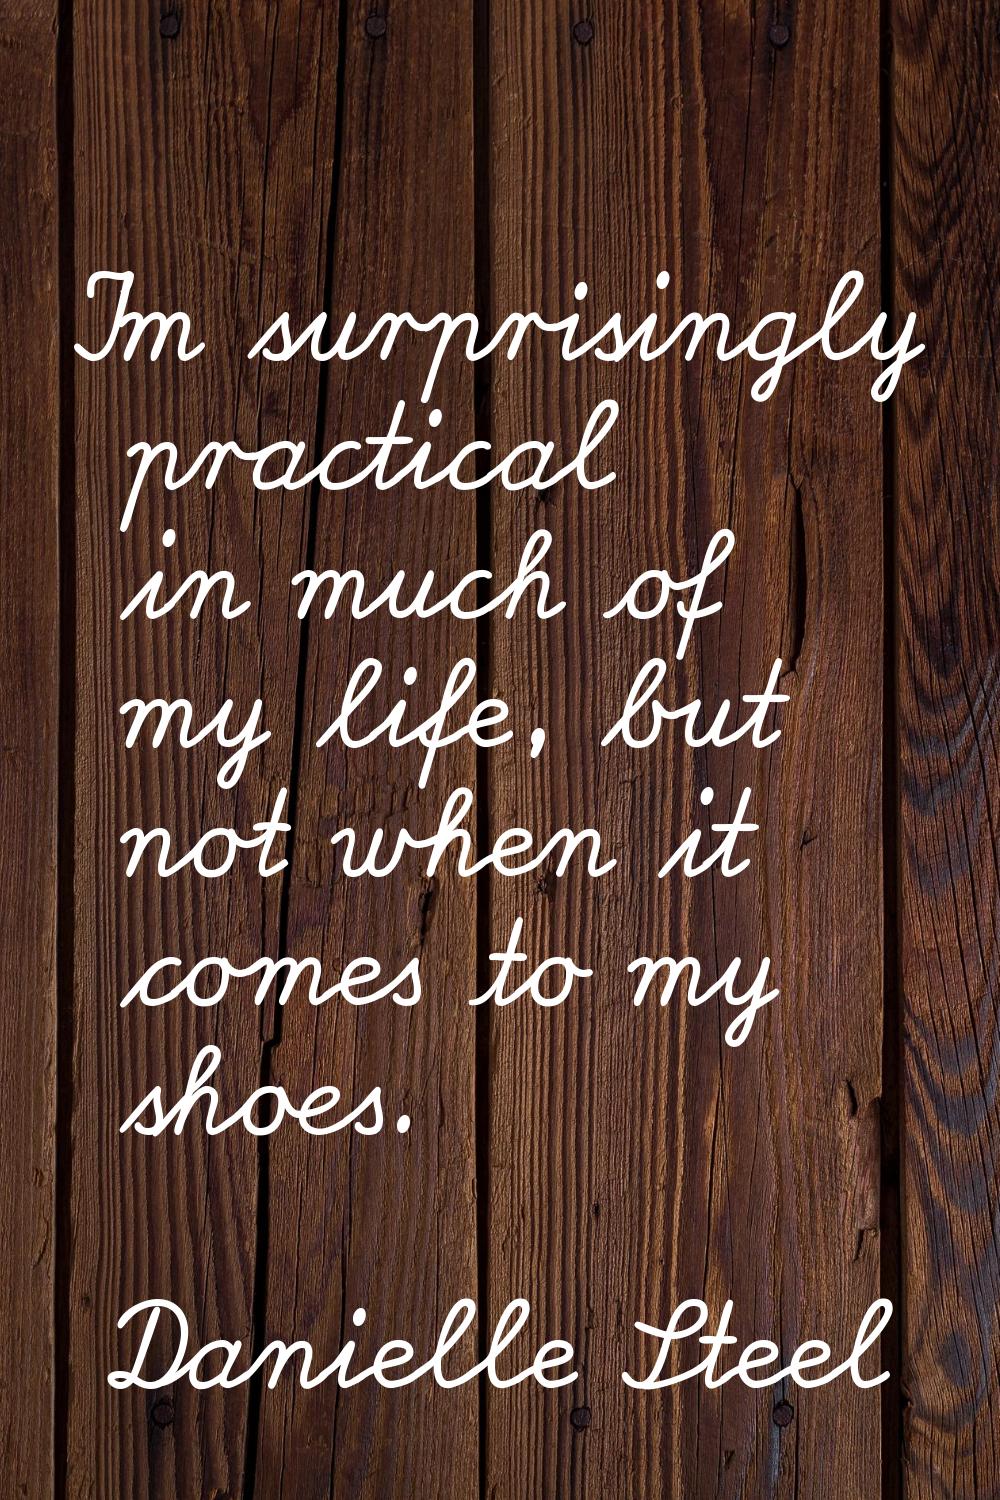 I'm surprisingly practical in much of my life, but not when it comes to my shoes.